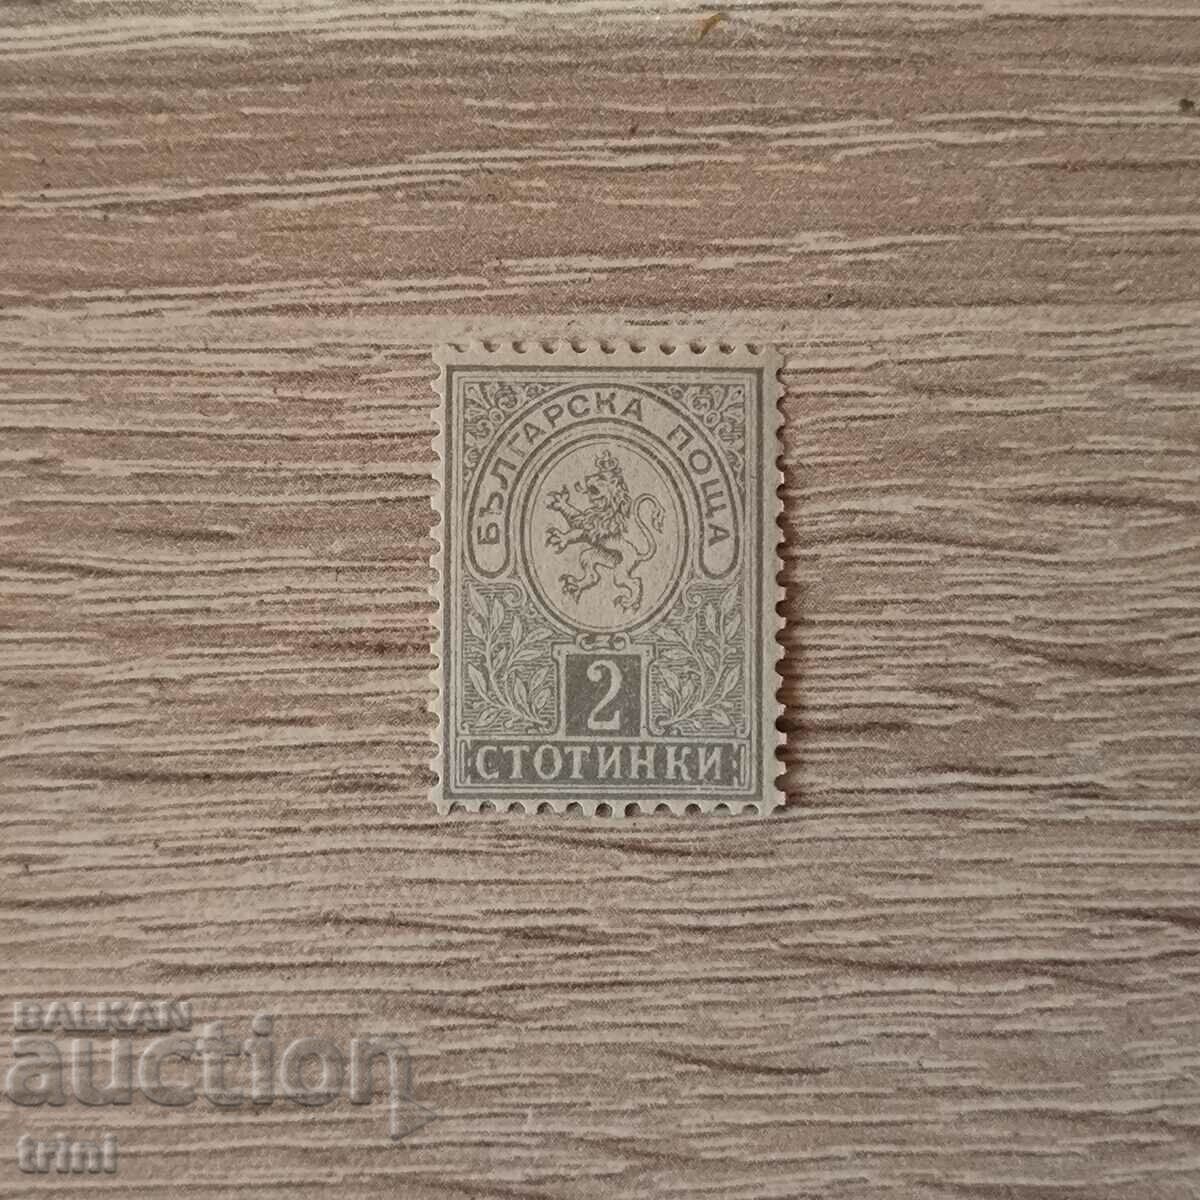 Bulgaria Small Lion 1889 2 cent. clean, with rubber patch